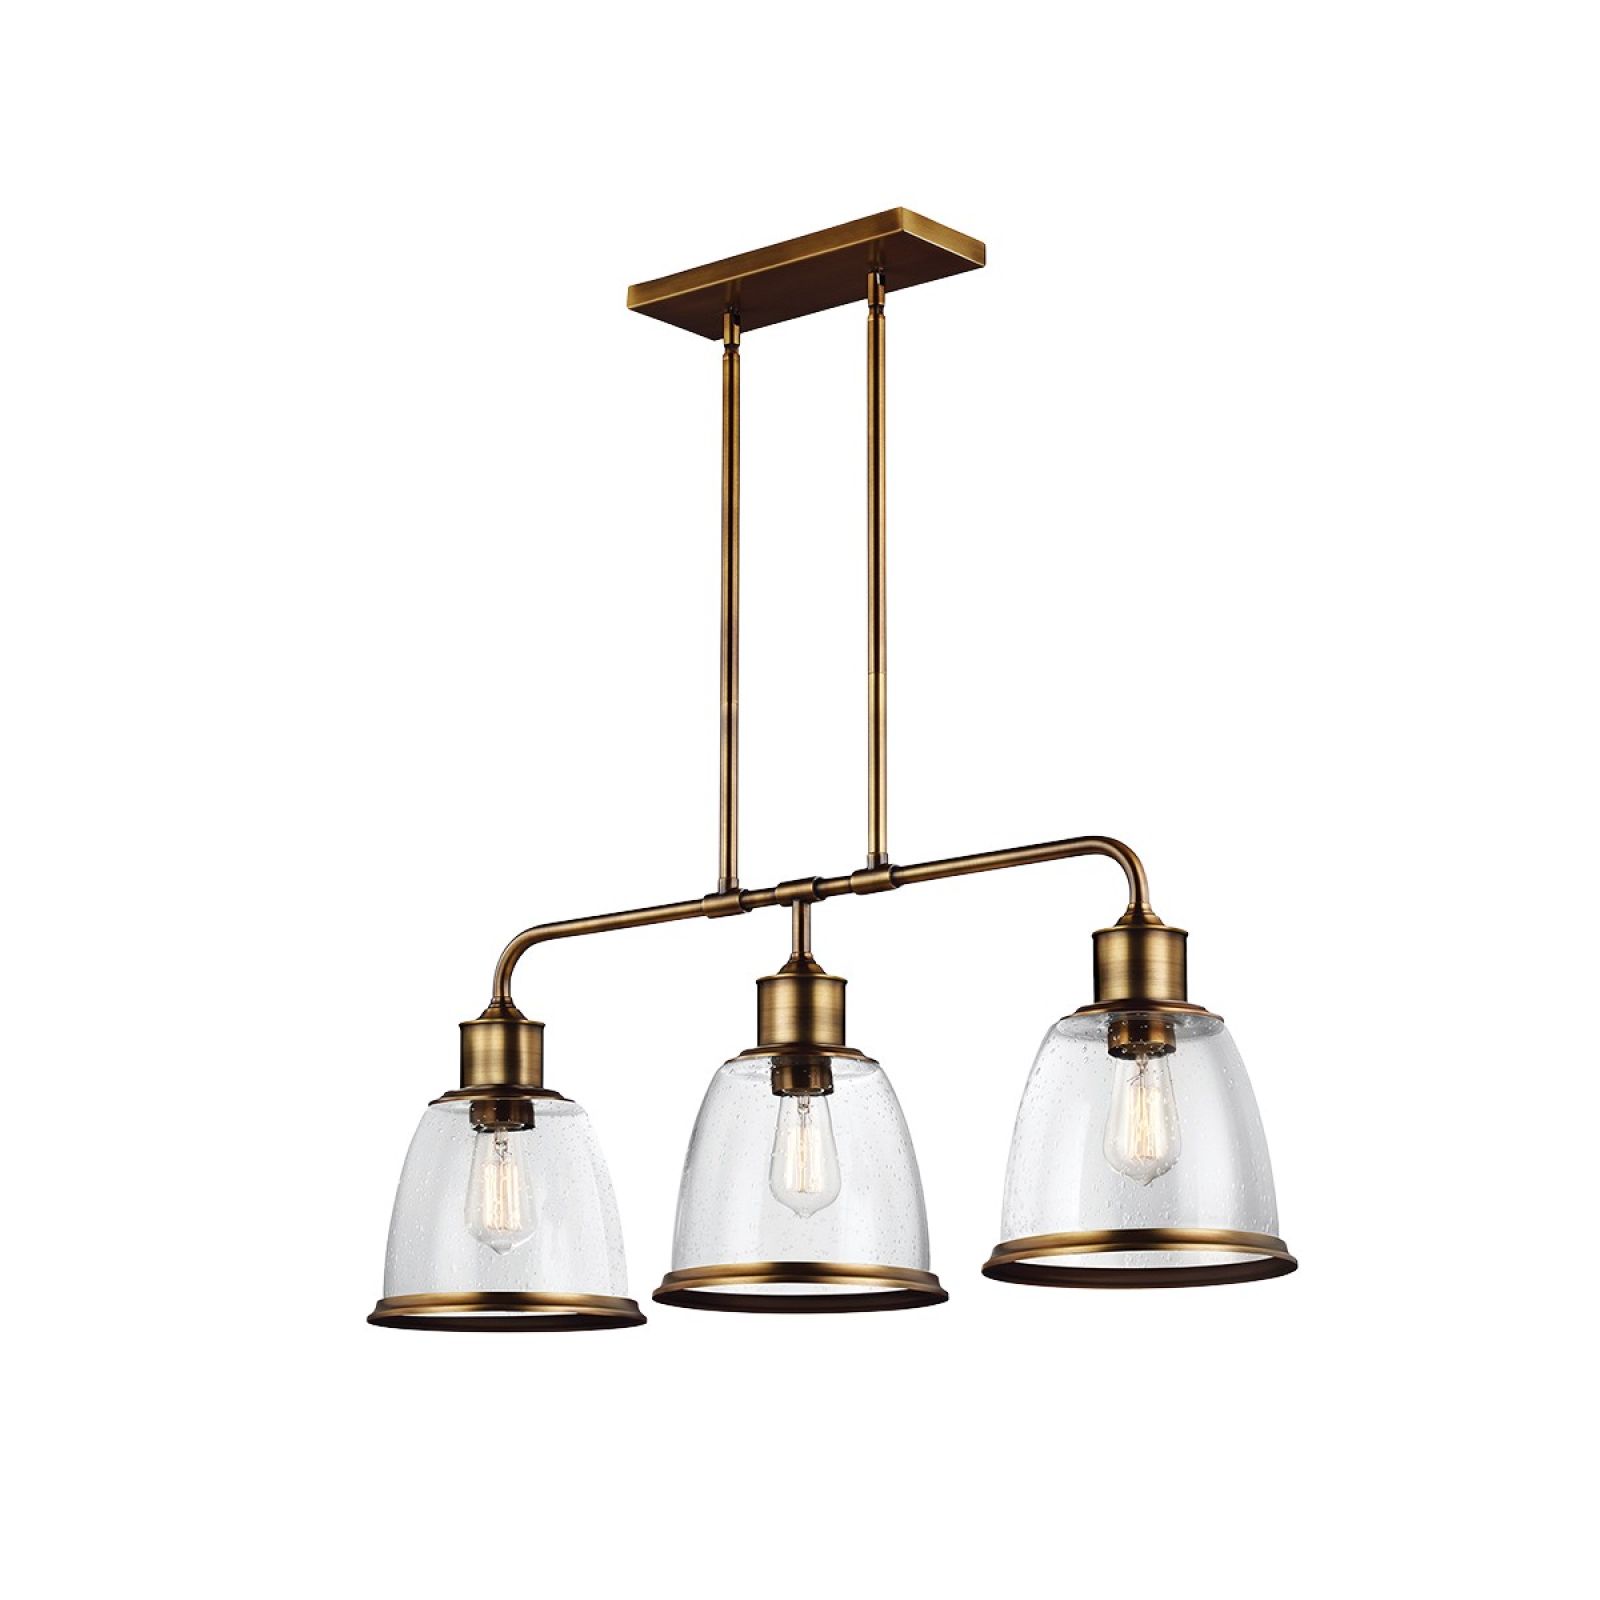 Hobsons three light island ceiling pendant in Aged Brass